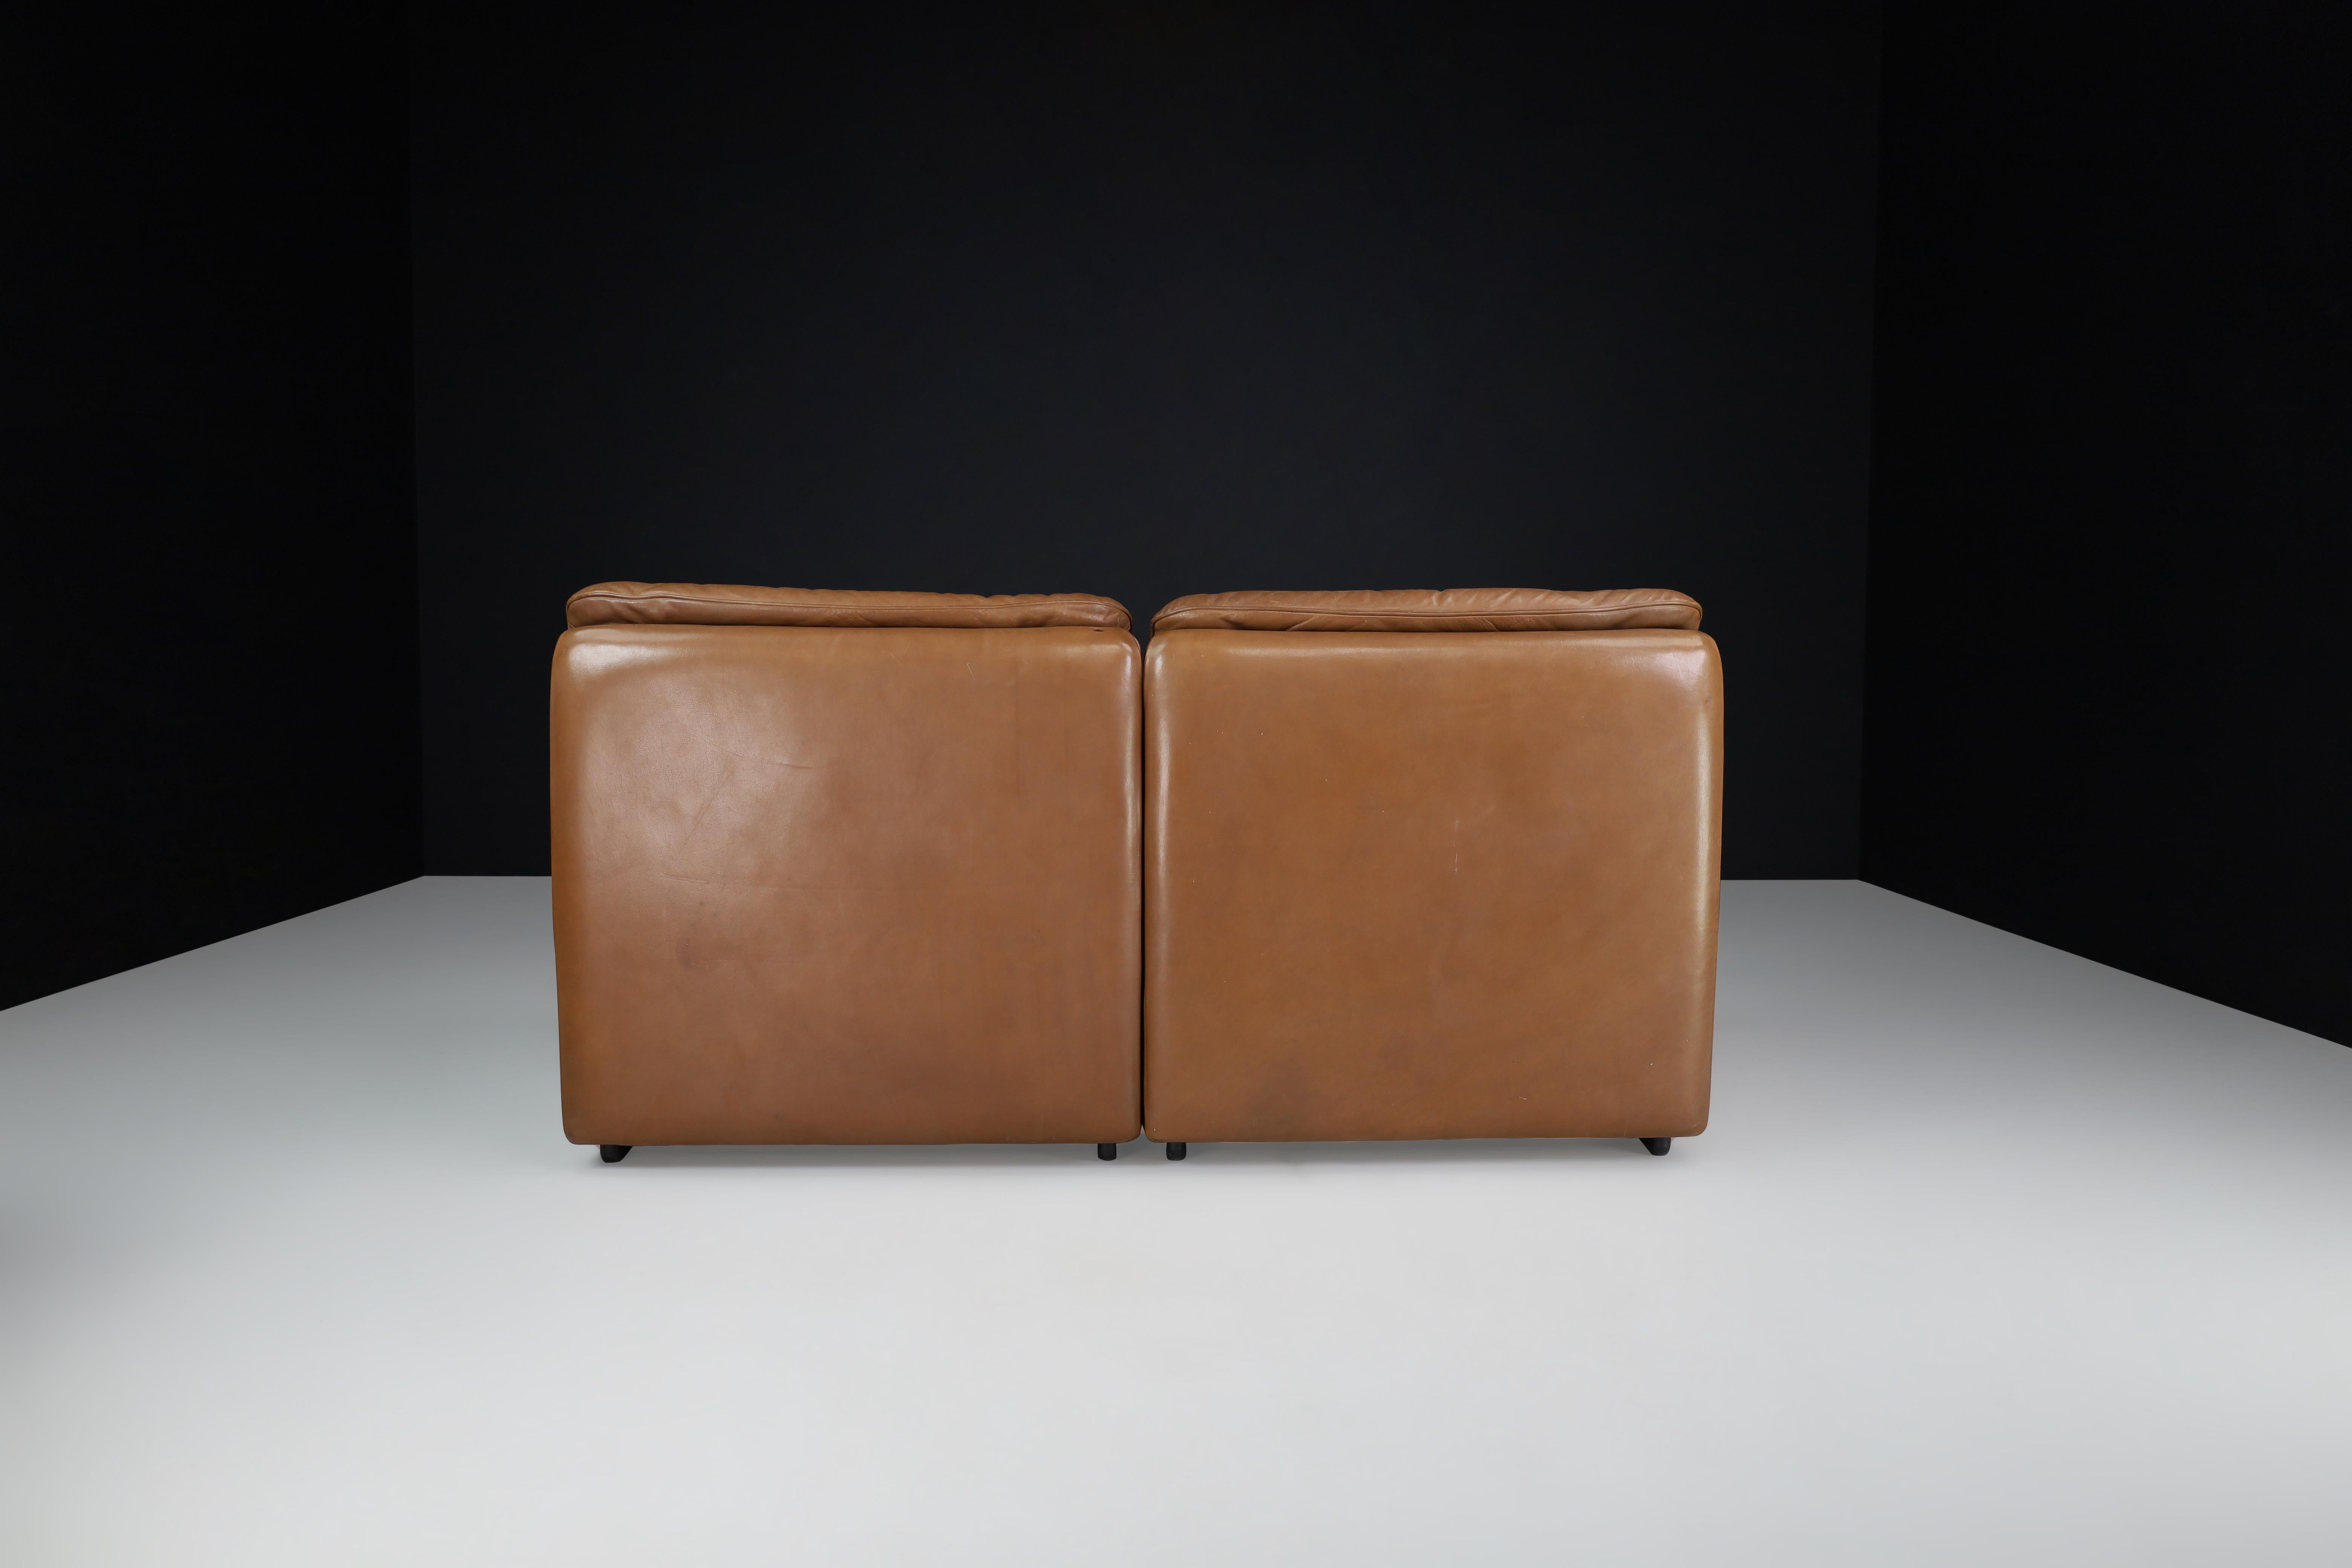 20th Century De Sede DS 63 Two-Seater Sofa in Patinated Leather, Switzerland, 1970s For Sale